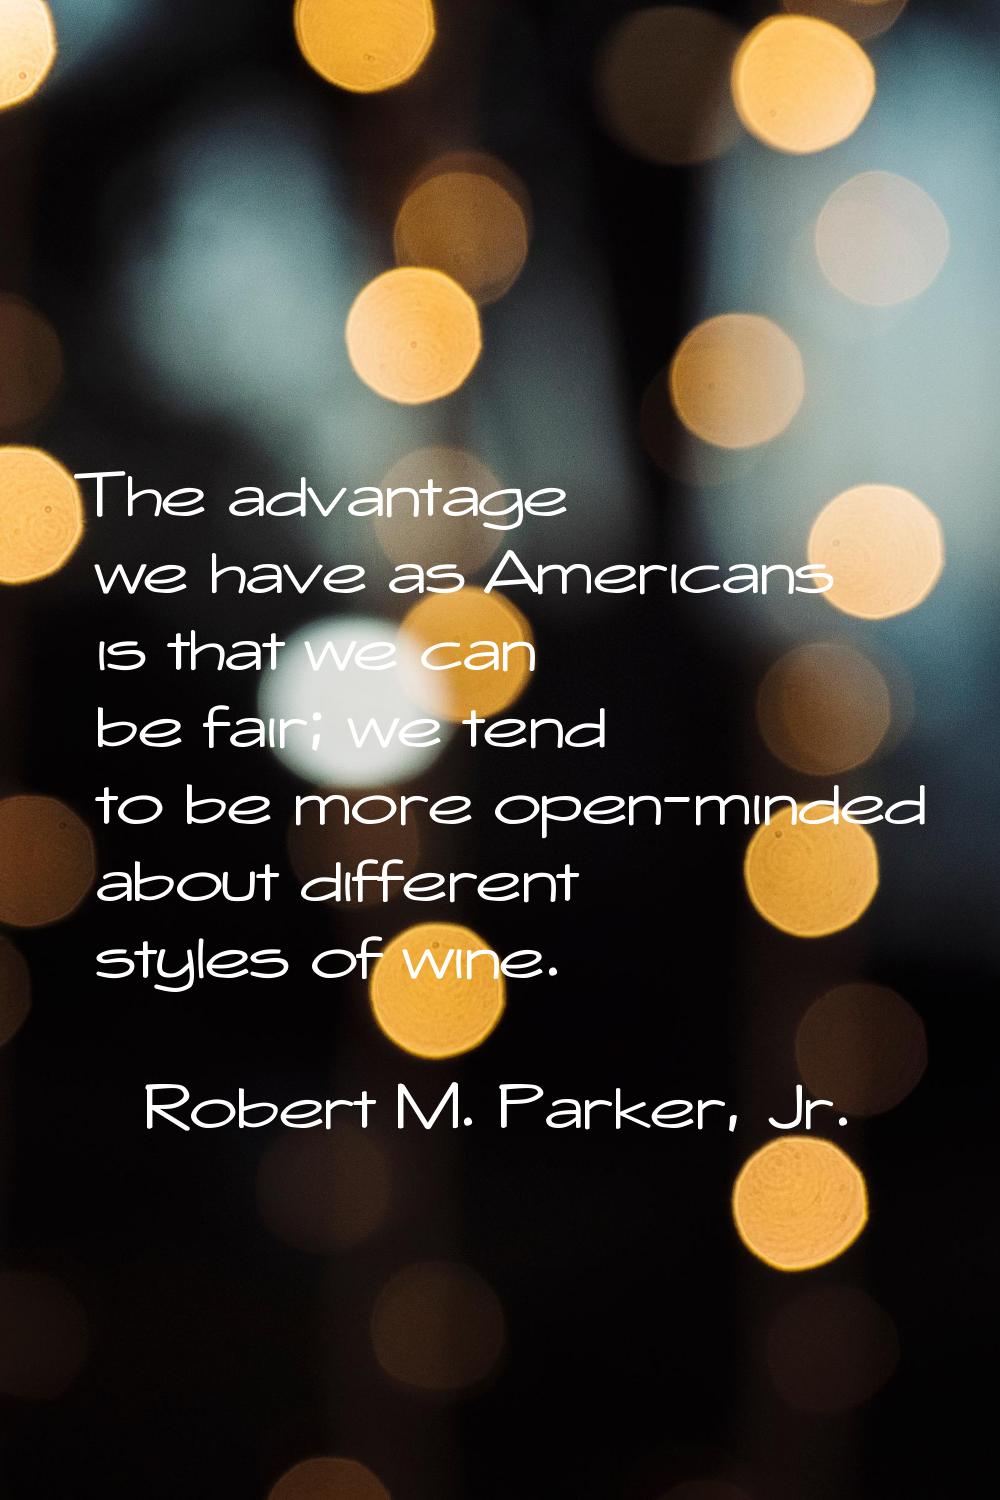 The advantage we have as Americans is that we can be fair; we tend to be more open-minded about dif